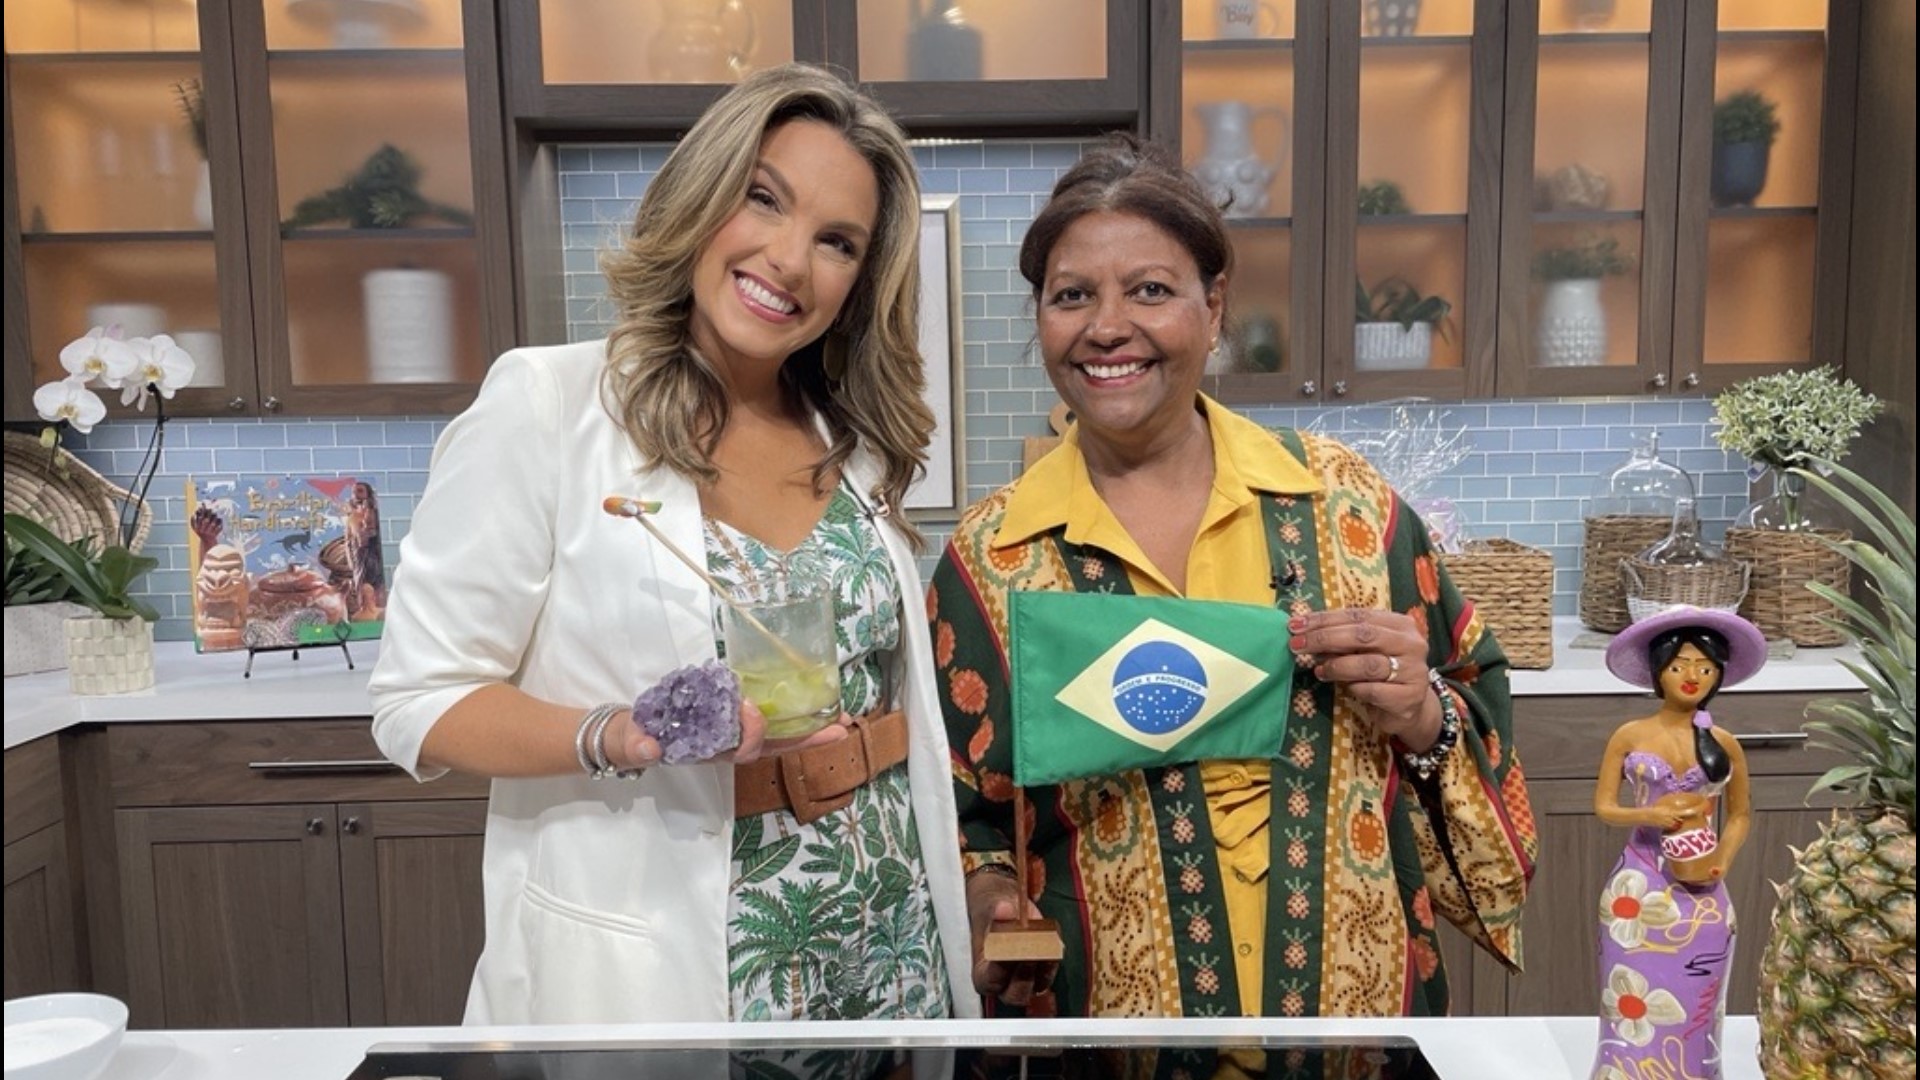 Sandra Rocha Evanoff of "Brasil Comes to You" joined the show to share a recipe for a Brazilian cocktail. #newdaynw